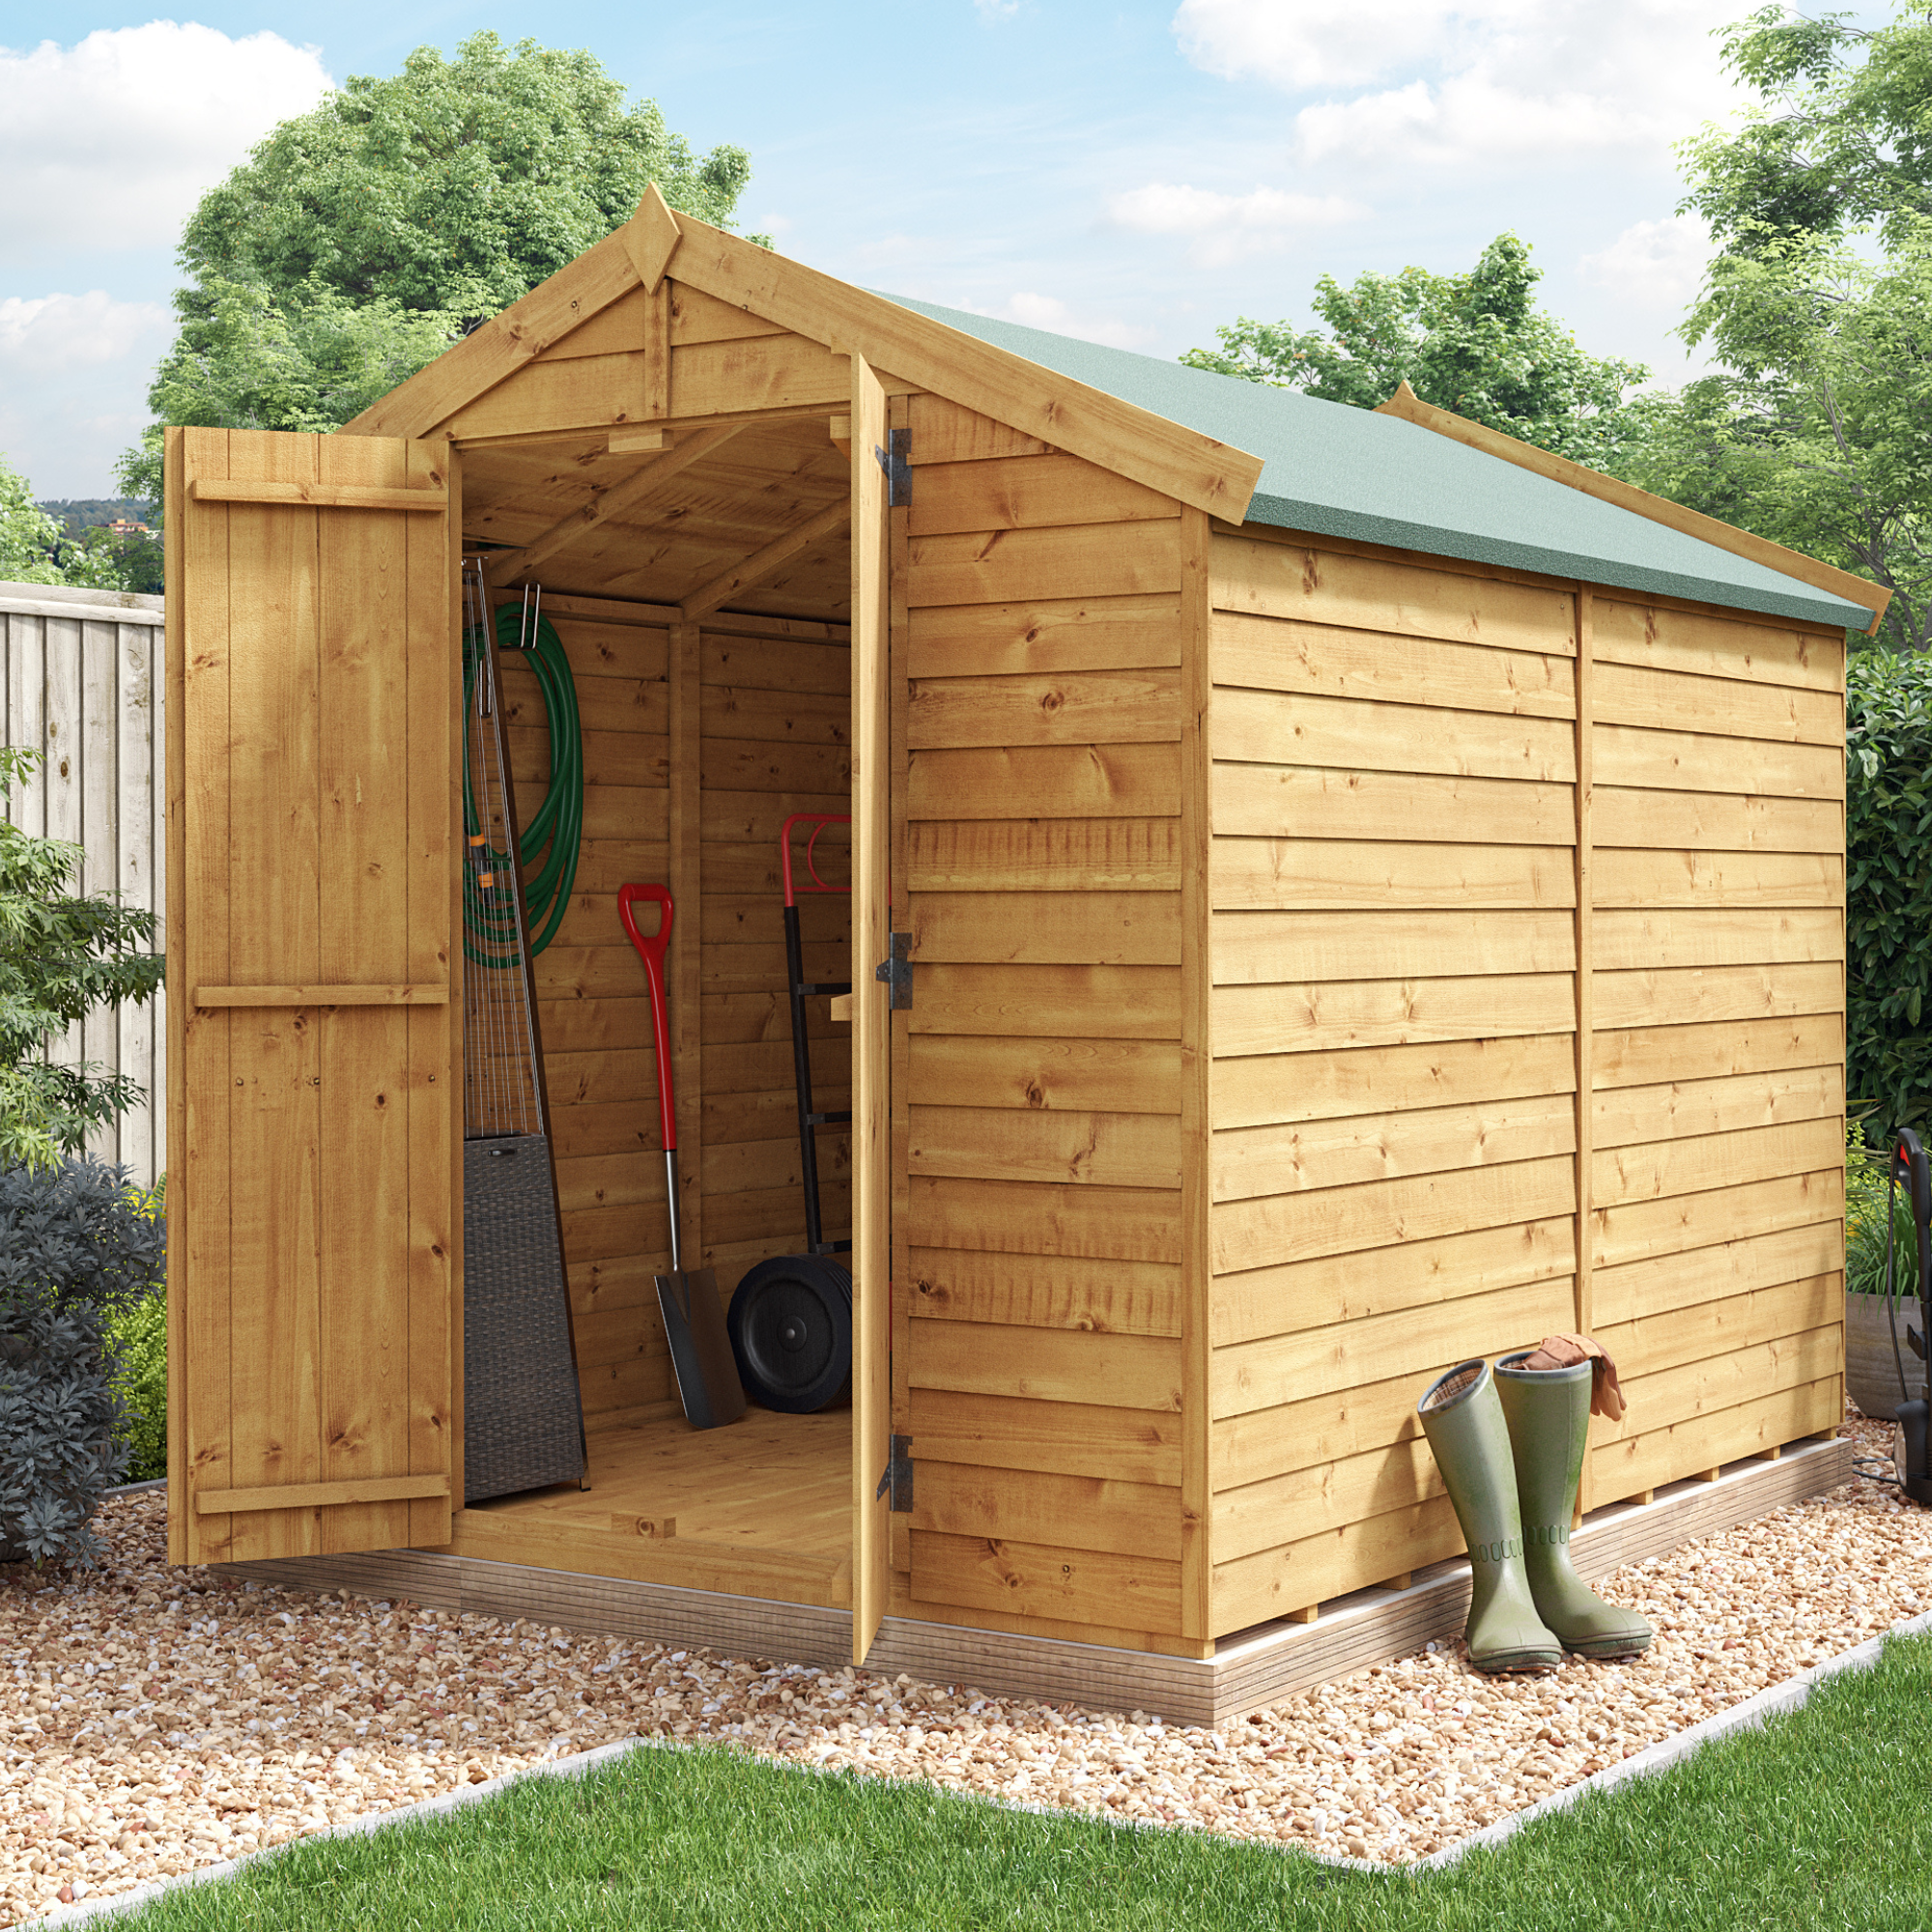 8 x 8 Pressure Treated Shed - BillyOh Keeper Overlap Apex Wooden Shed - Windowless 8x8 Garden Shed